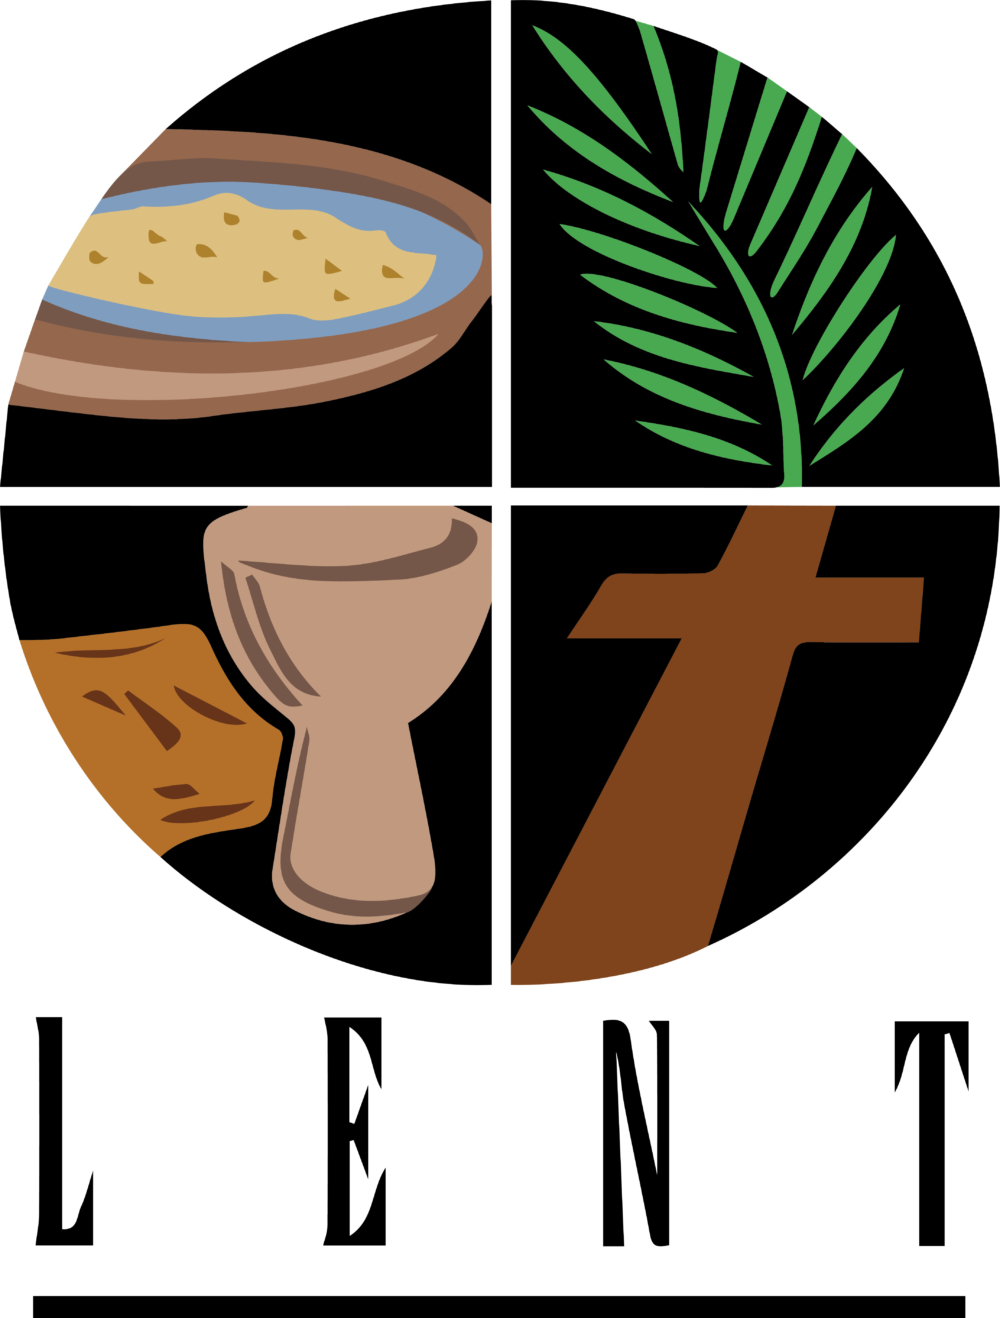 3rd Sunday in Lent Image